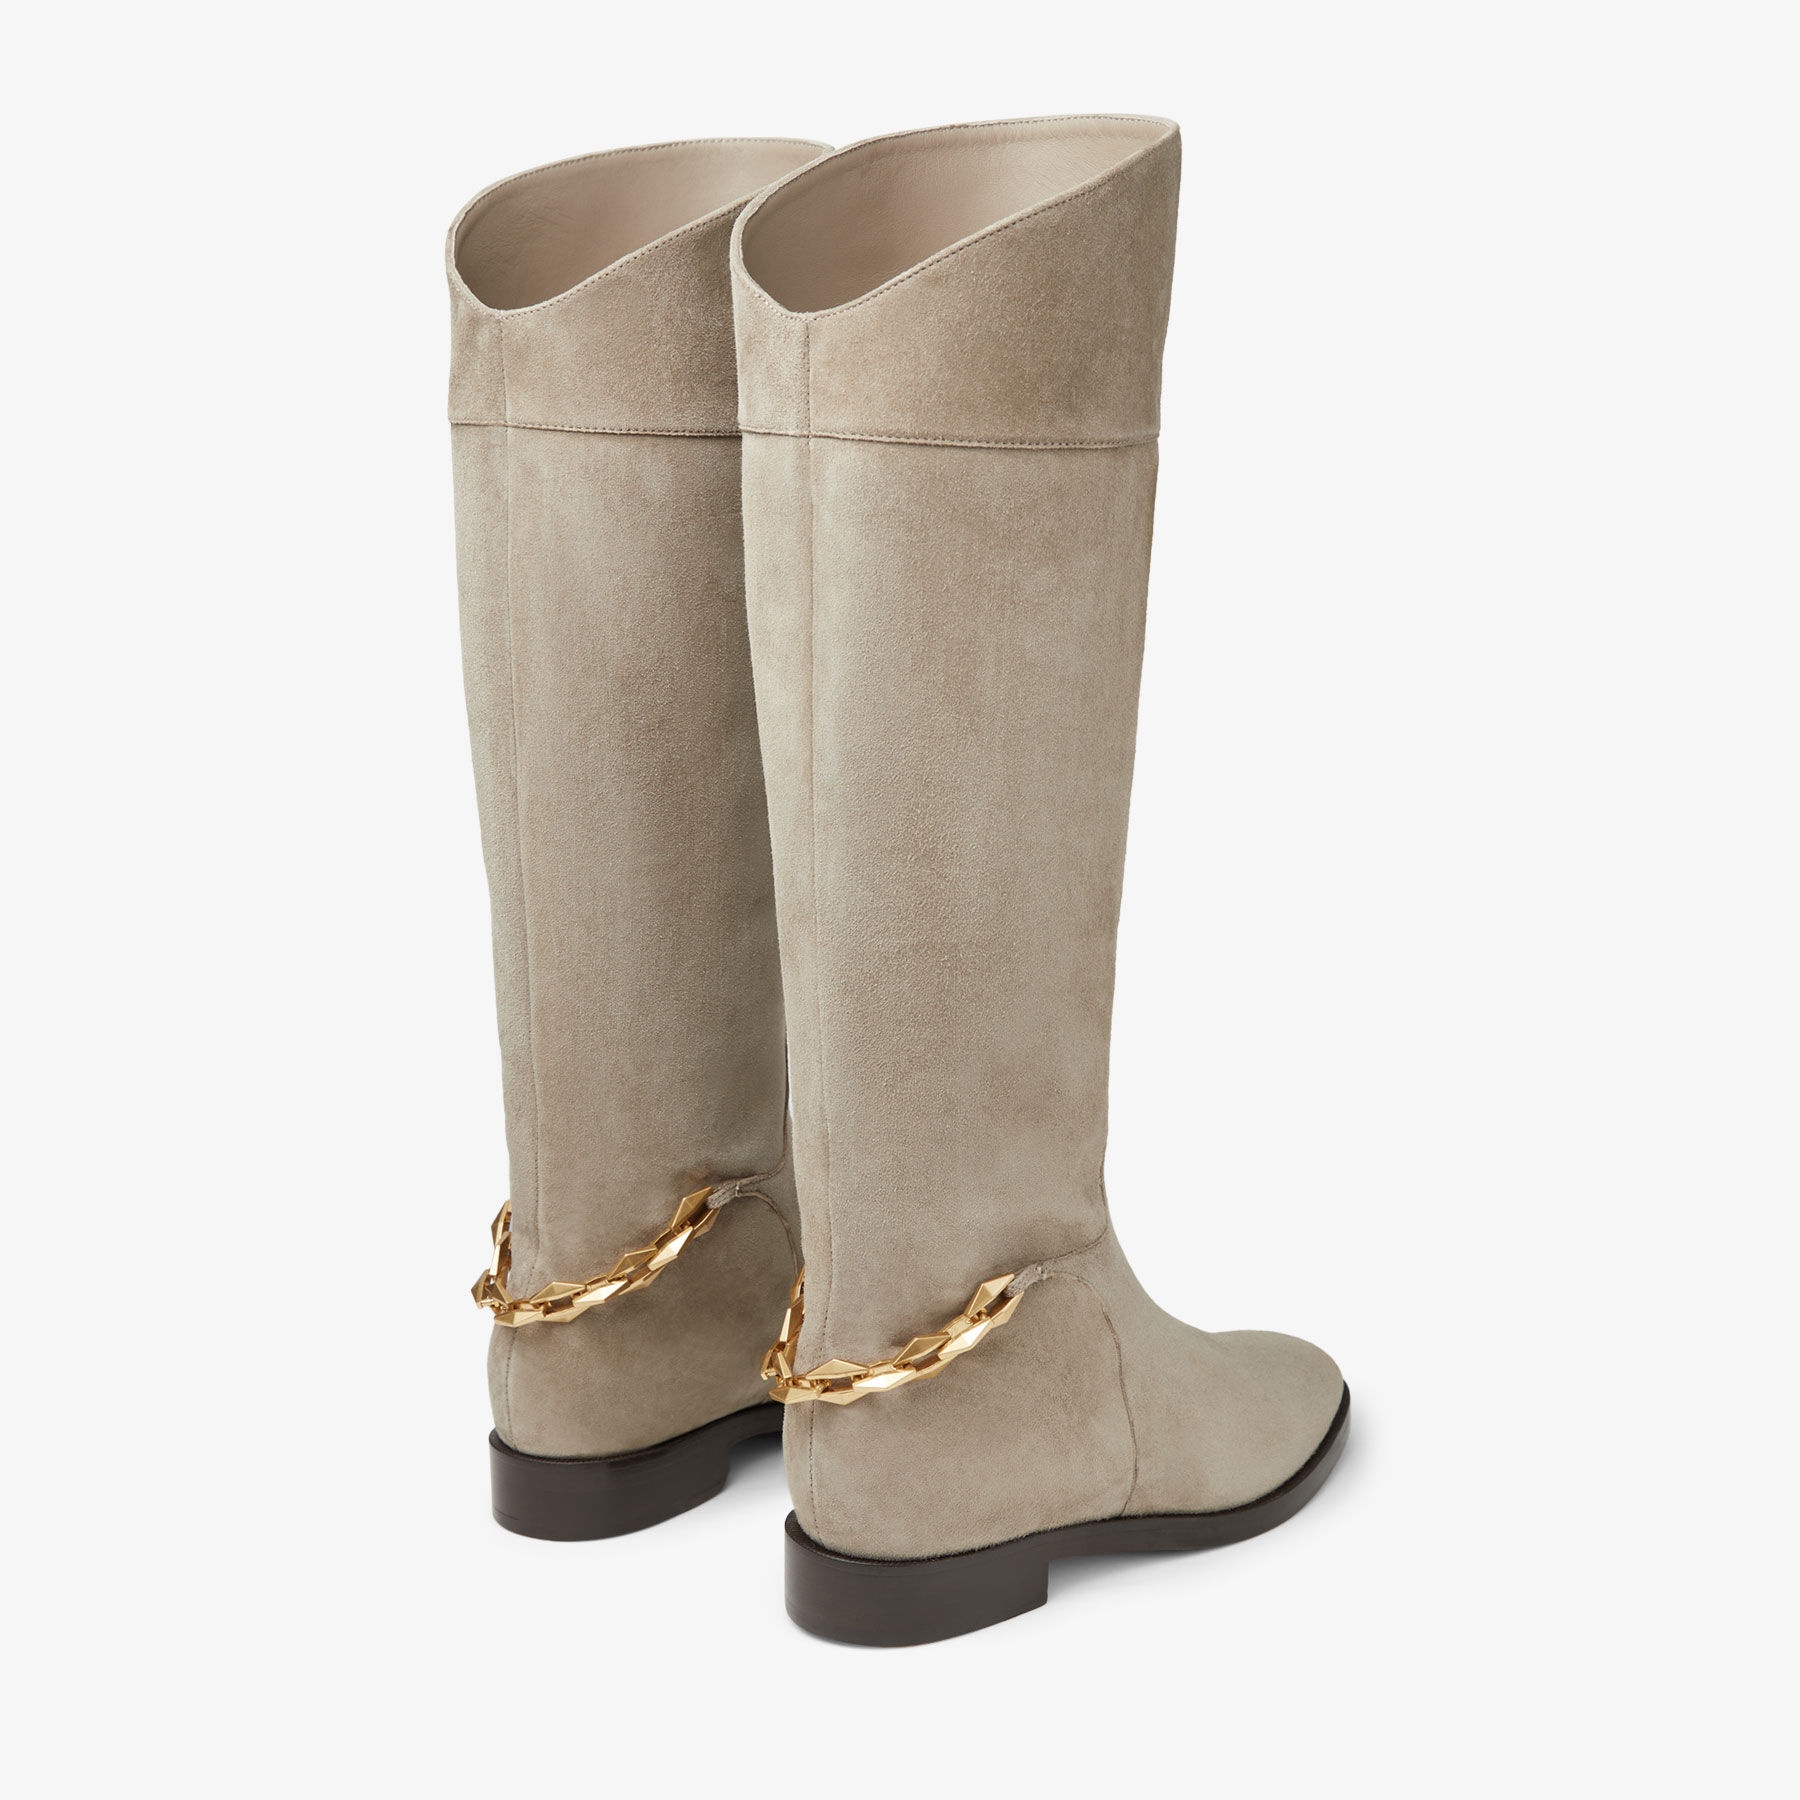 Nell Knee Boot Flat
Taupe Suede Knee-High Boots with Chain - 6